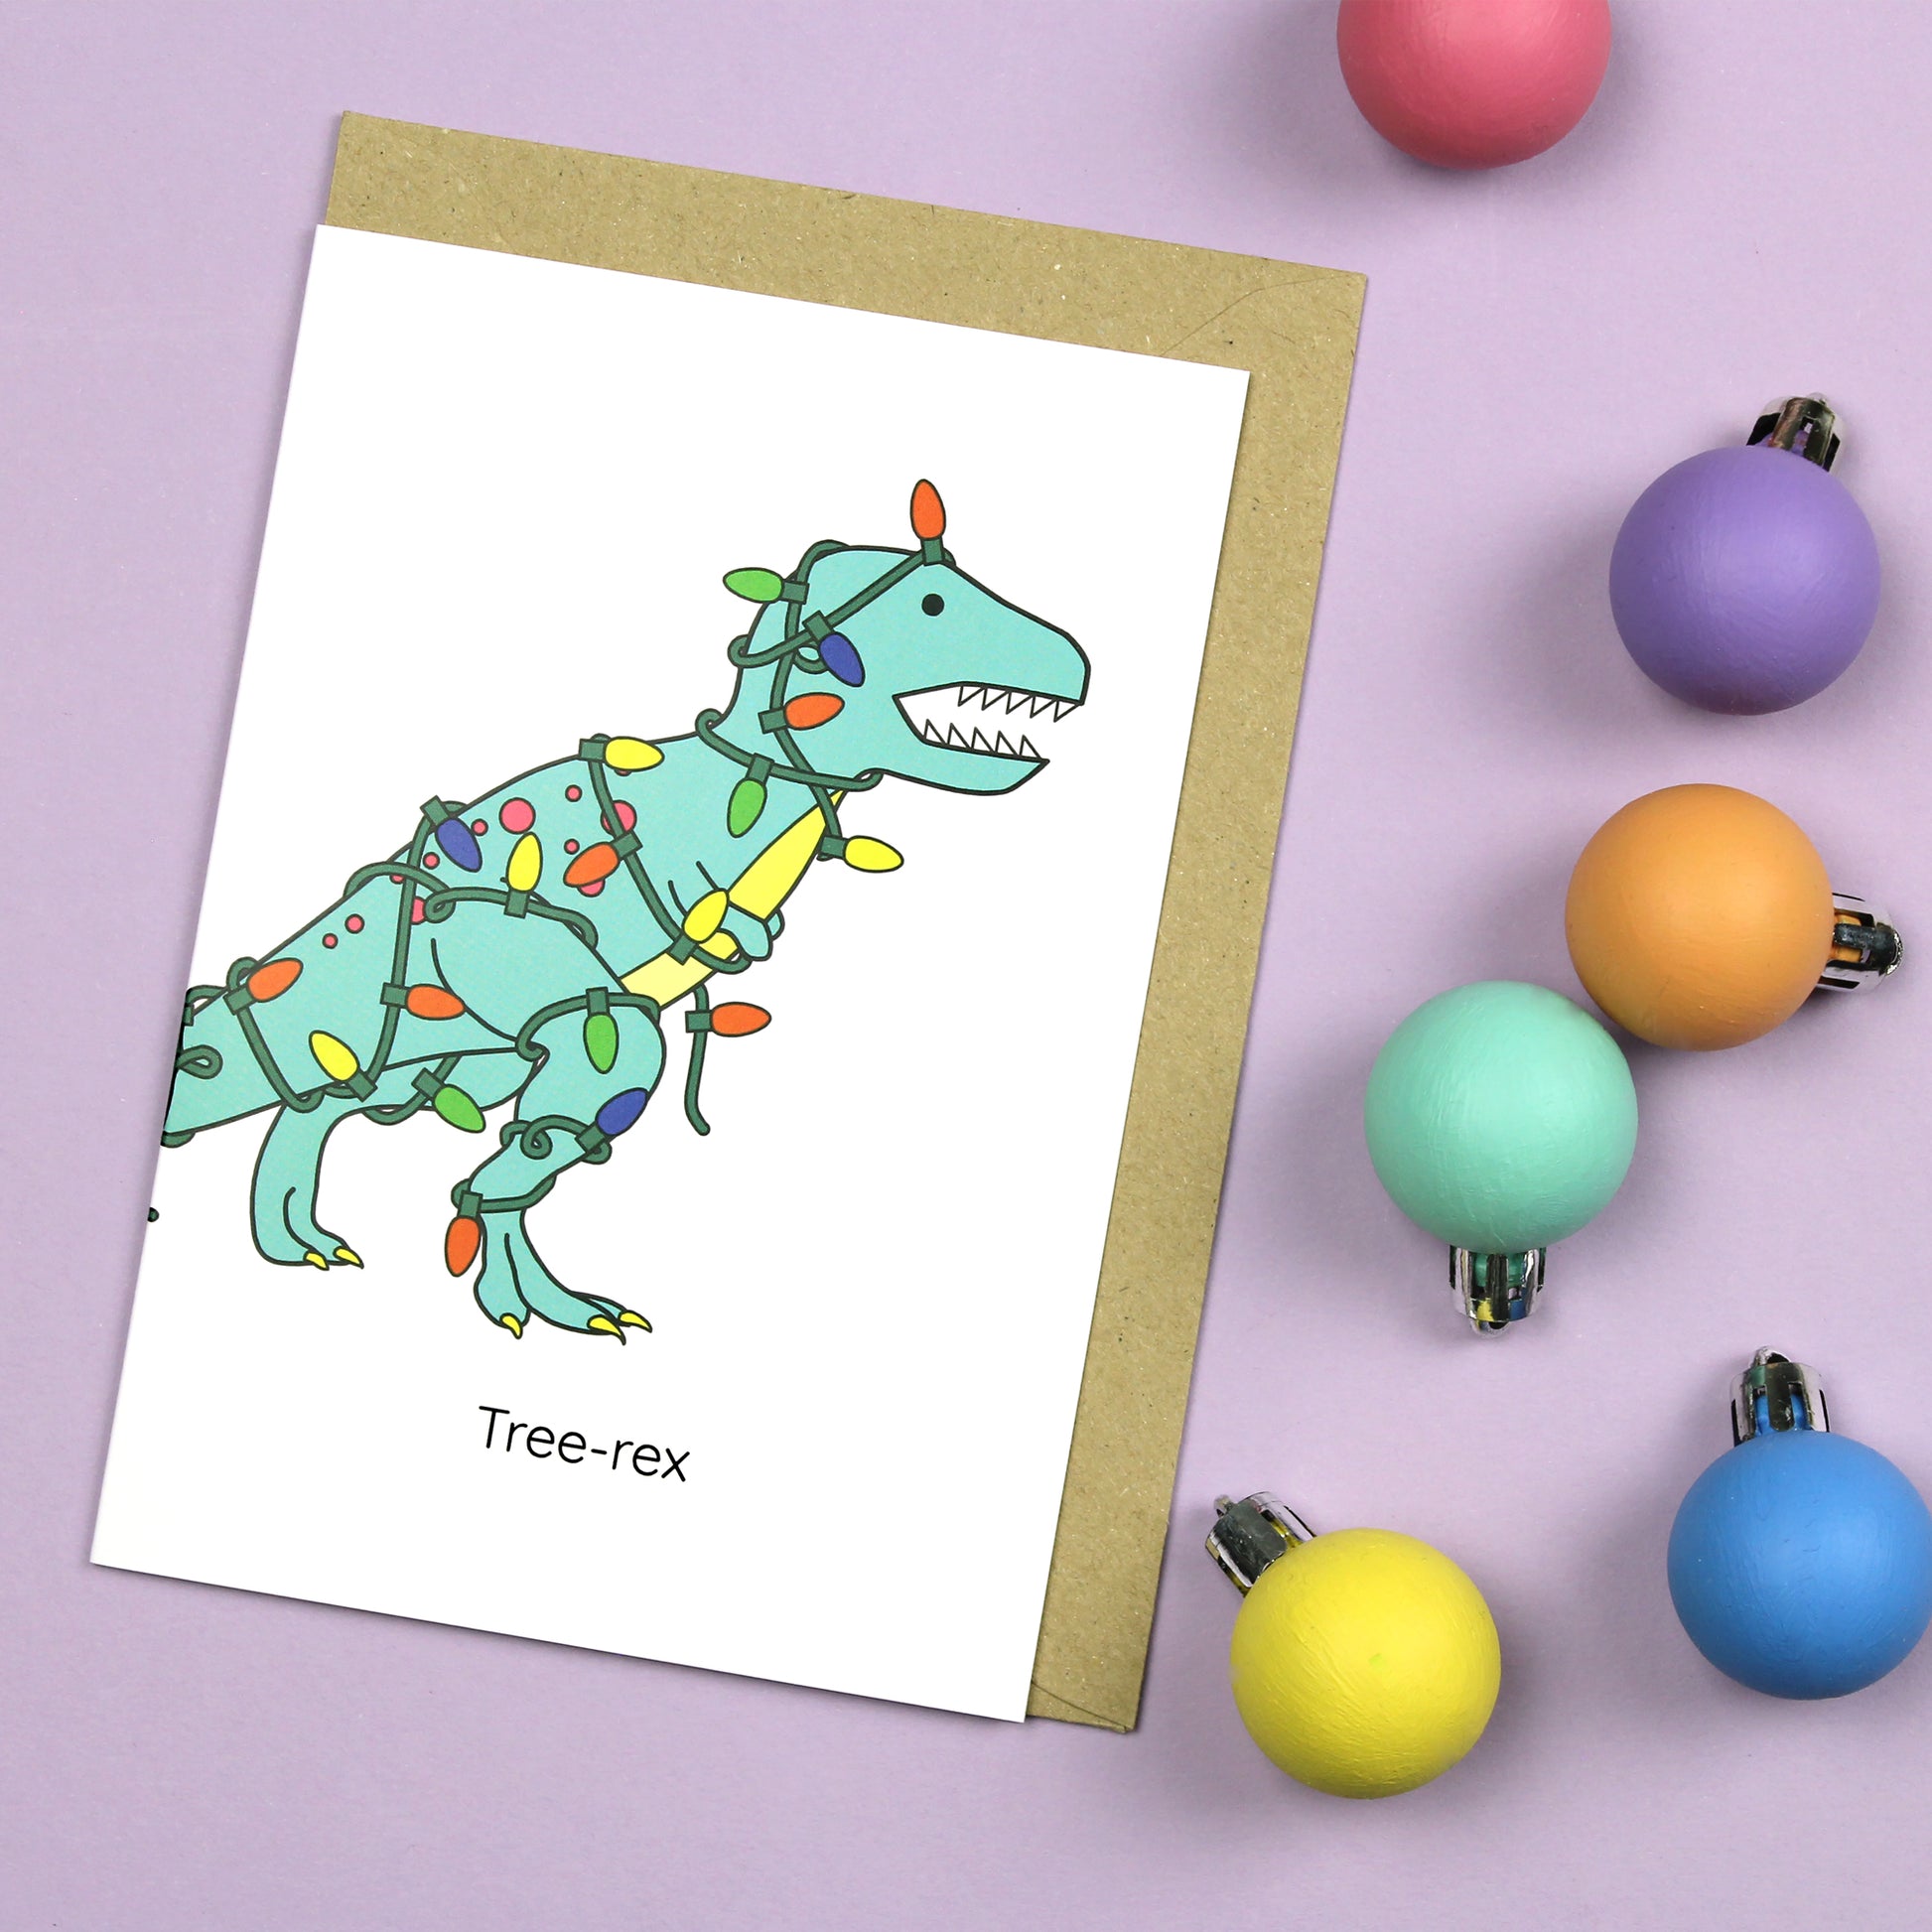 Tree-rex greeting card with a brown kraft envelope on a purple background with pastel coloured baubles scattered next to it